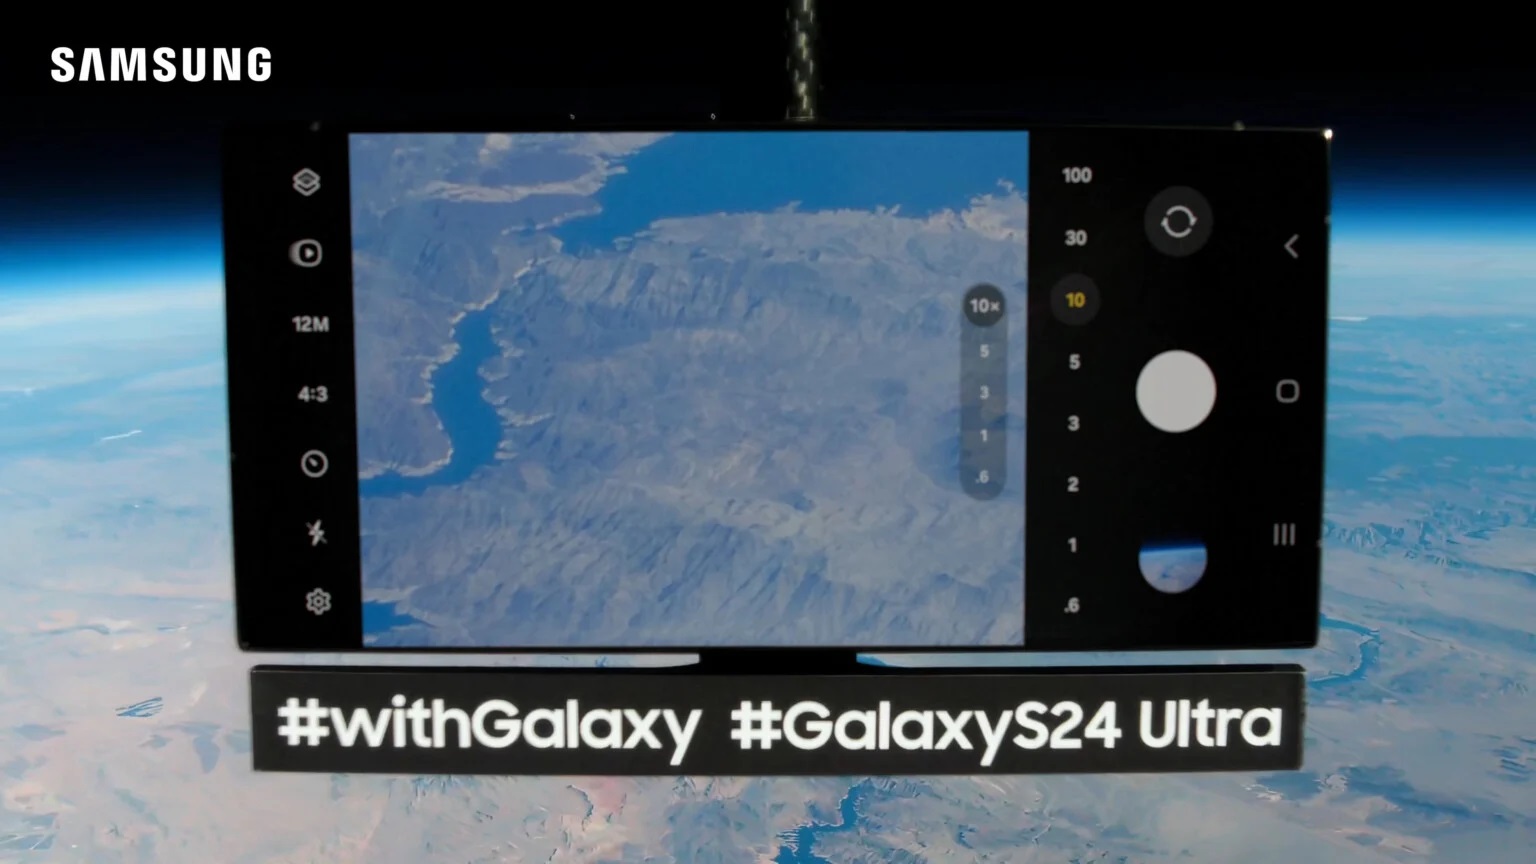 Samsung has sent the Galaxy S24 Ultra flagship into space